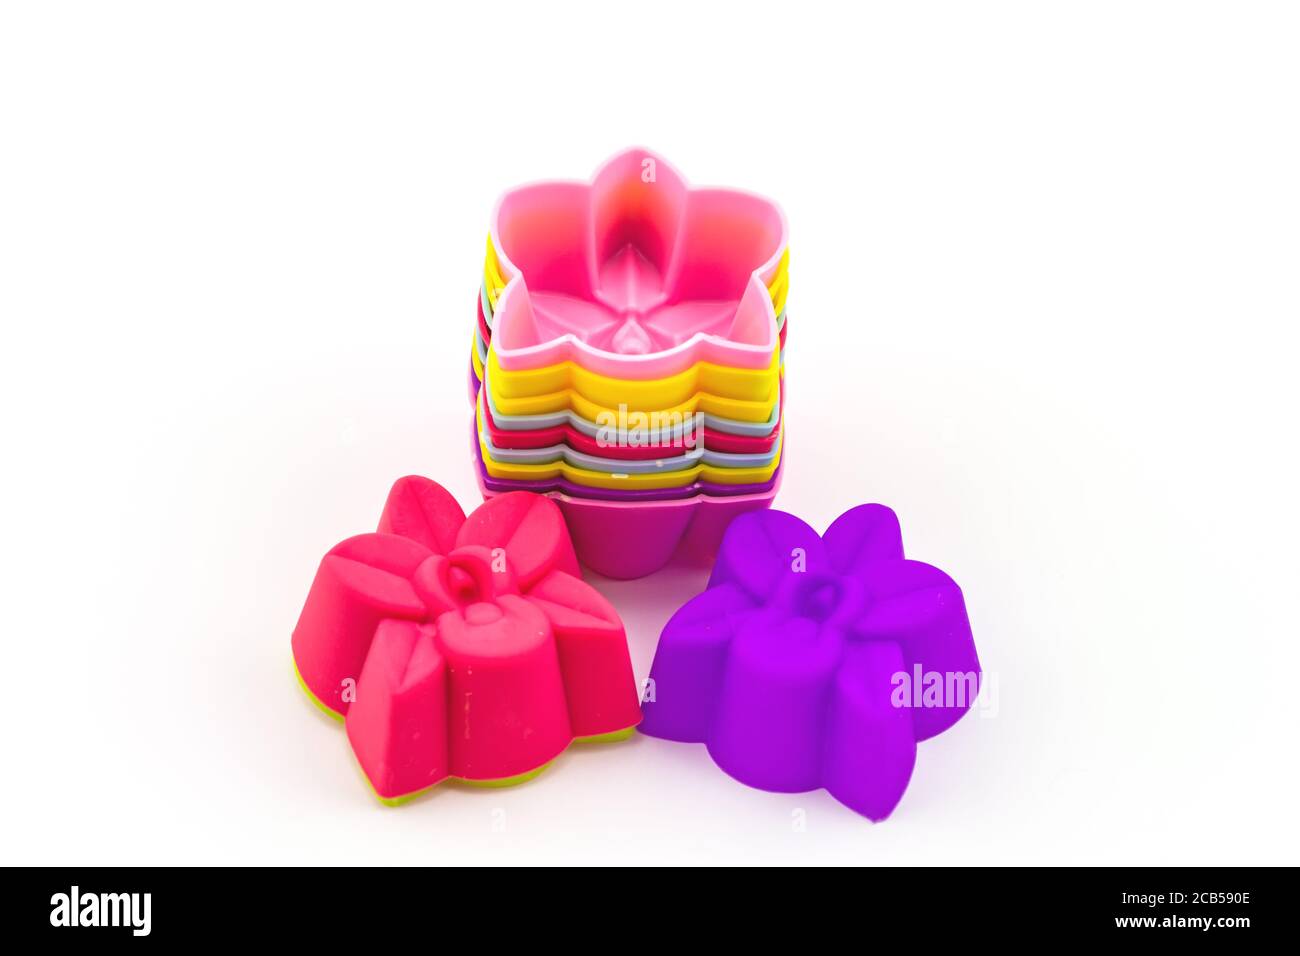 Colorful of silicone molds for baking in the form of hearts, object on a white background Stock Photo